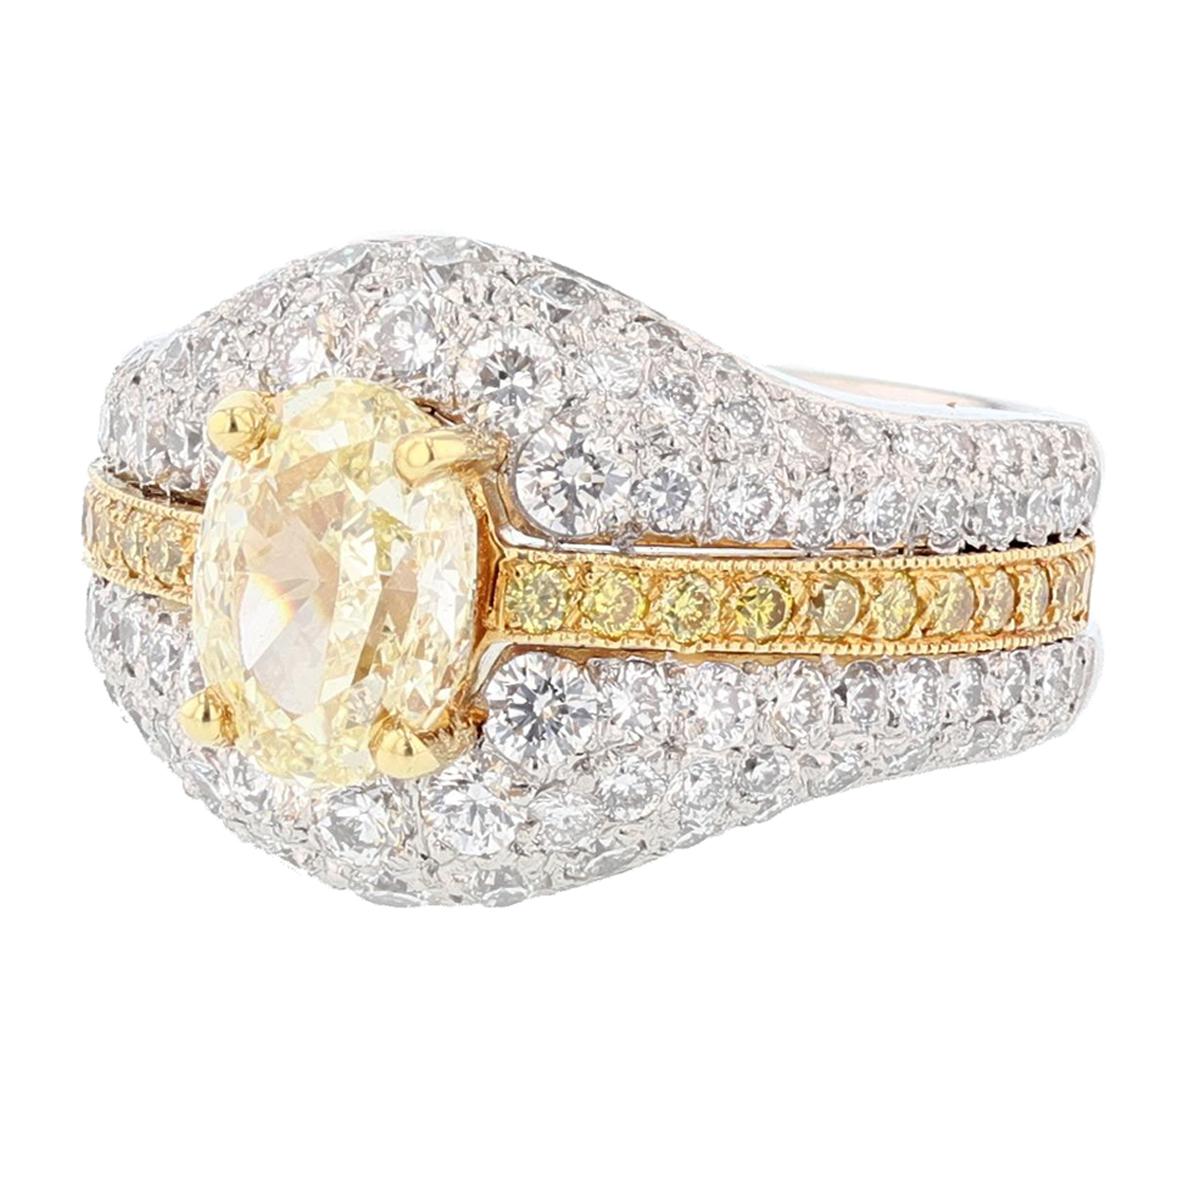 This ring is made in Platinum and 18 karat yellow gold featuring 
 an Oval Cut Fancy Light Yellow Diamond. The center diamond is a 1.51 carat IGI certified Oval Shape Yellow Diamond with a color grade (FLY, or Fancy Light Yellow) and clarity grade